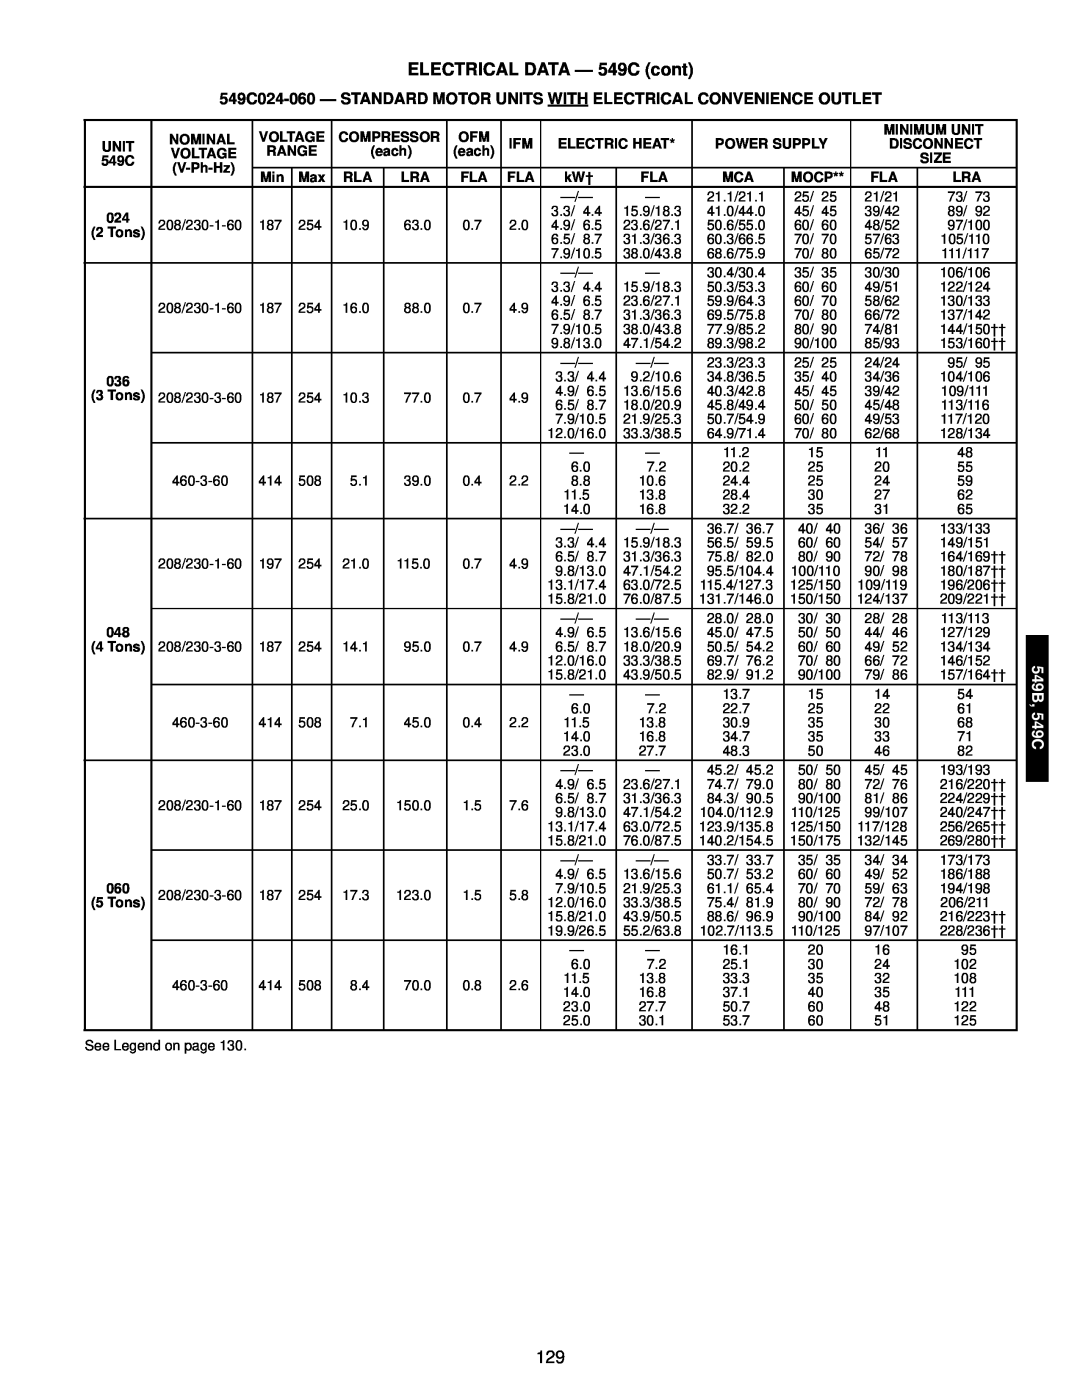 Bryant manual ELECTRICAL DATA — 549C cont, 21/21 